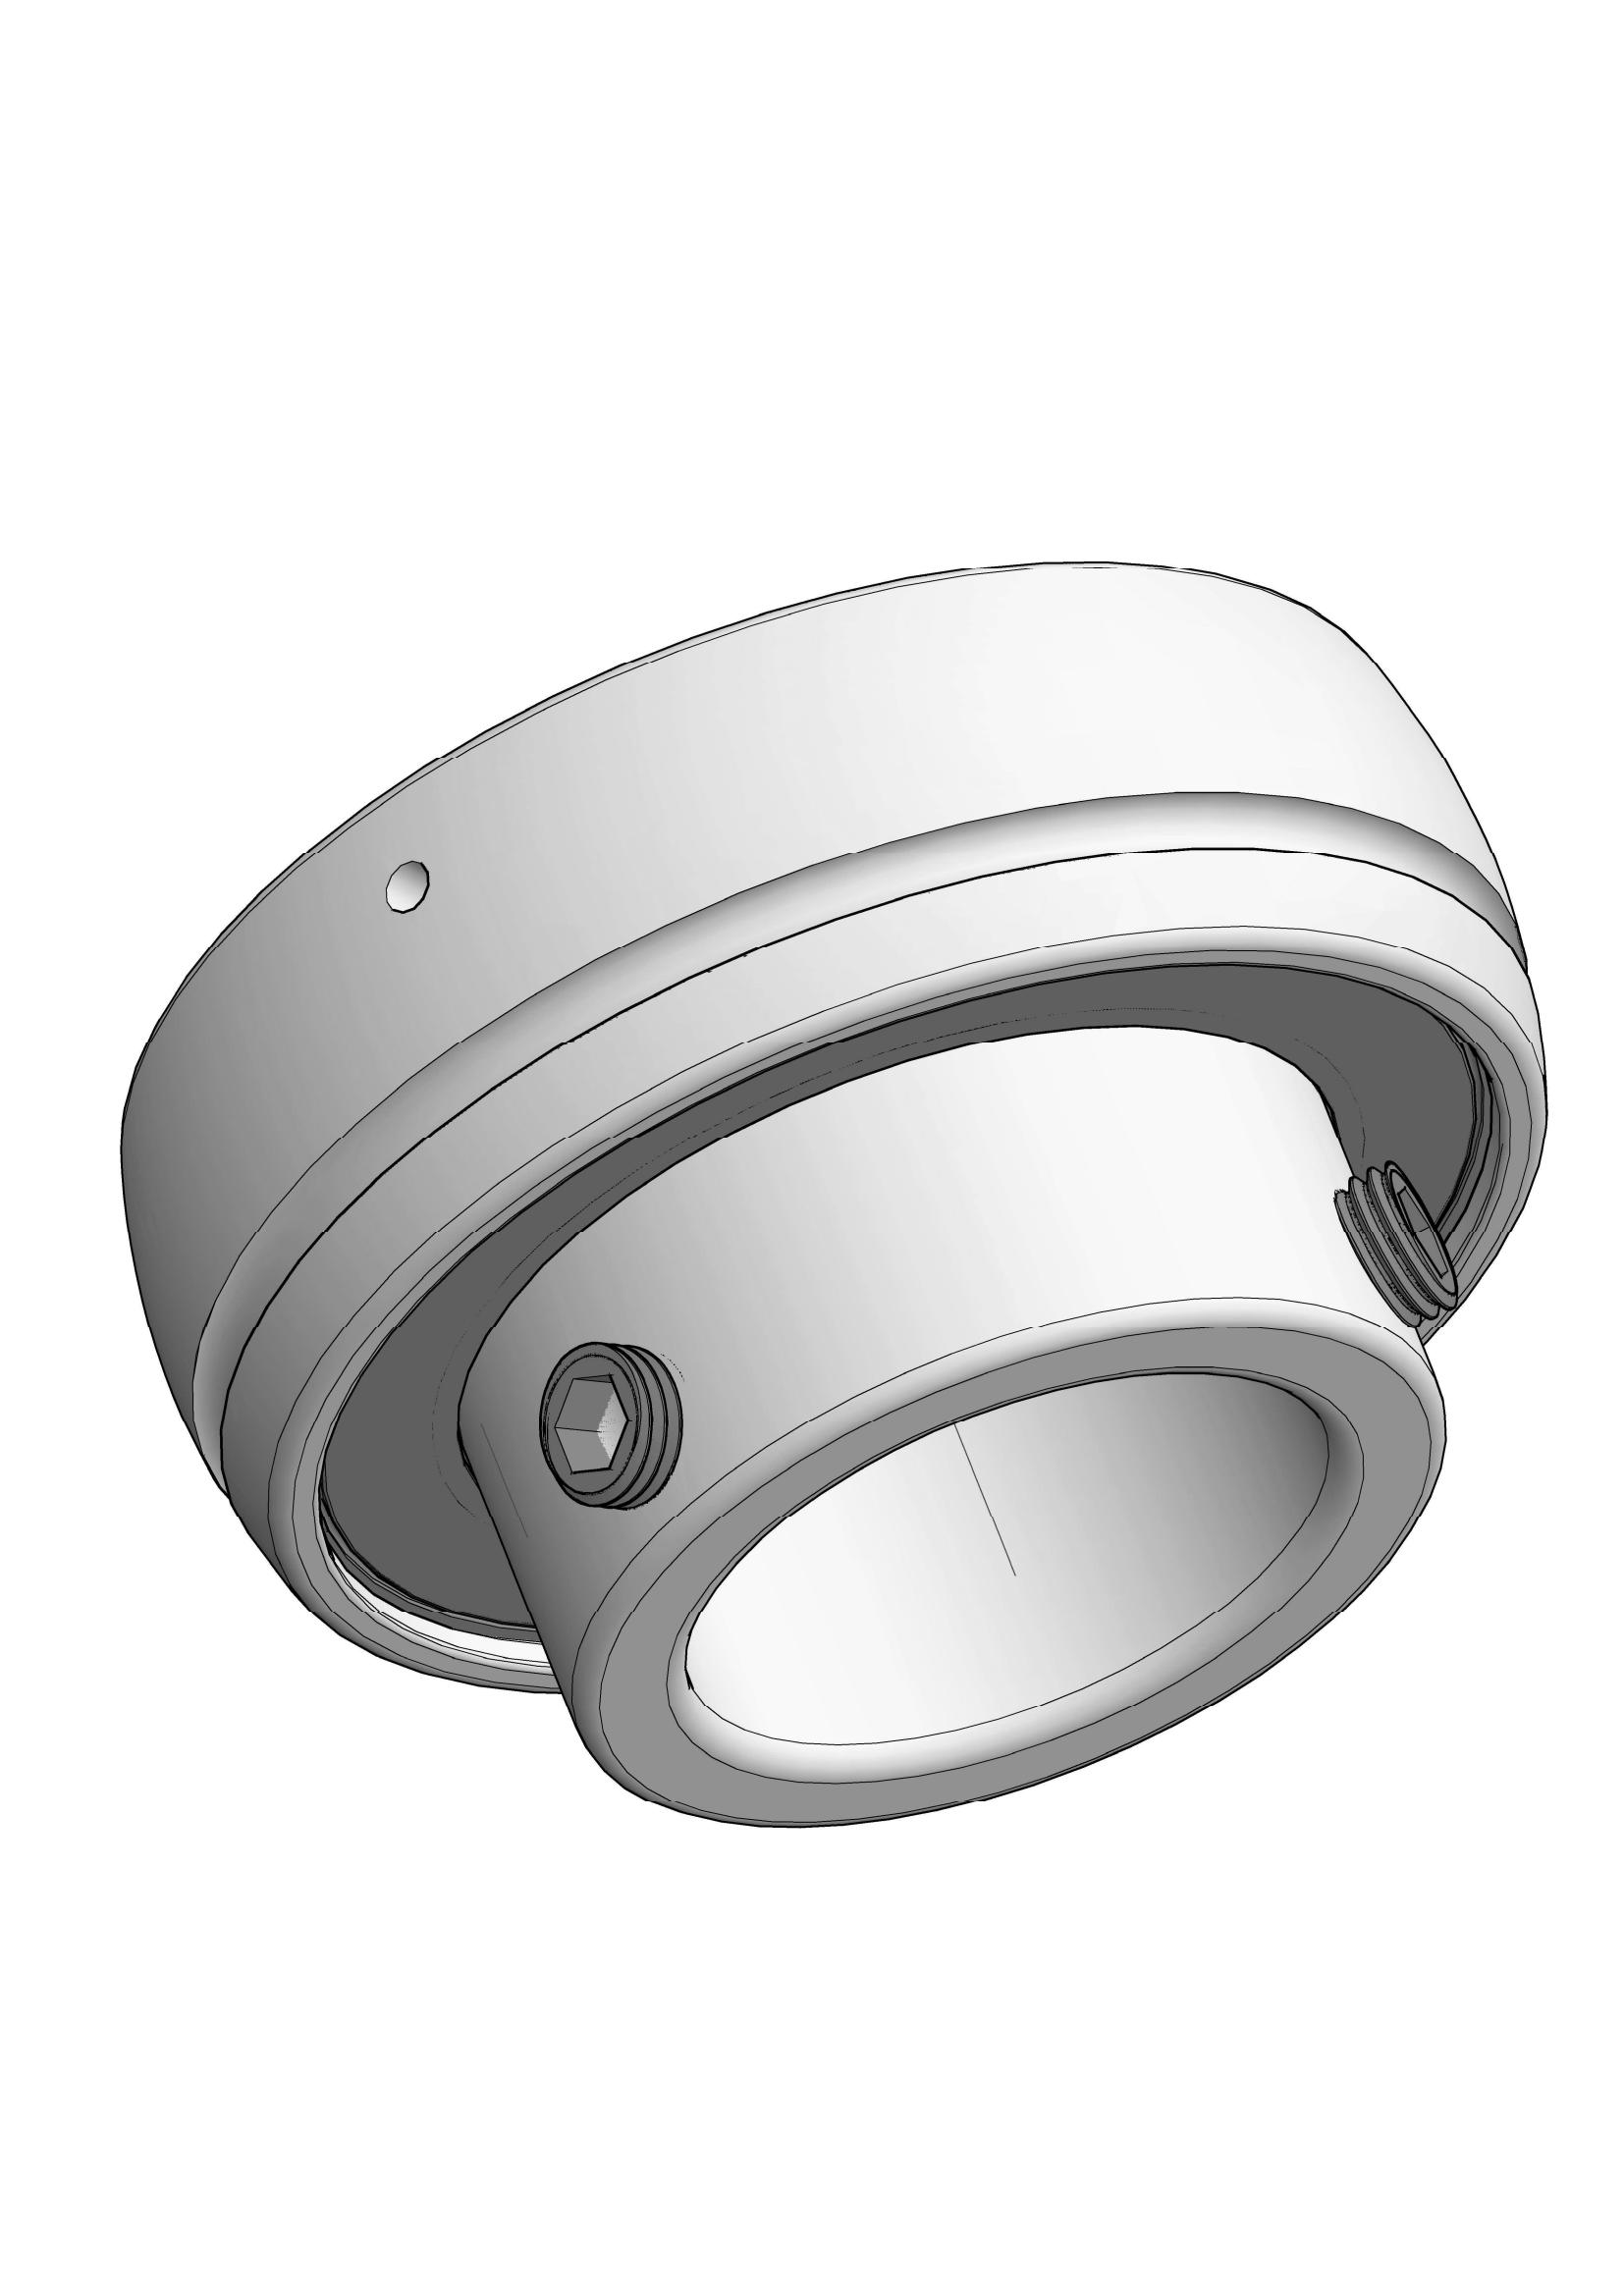 SB207-23 insert ball bearings with Eccentric Collar Lock with 1-7/16 inch Bore